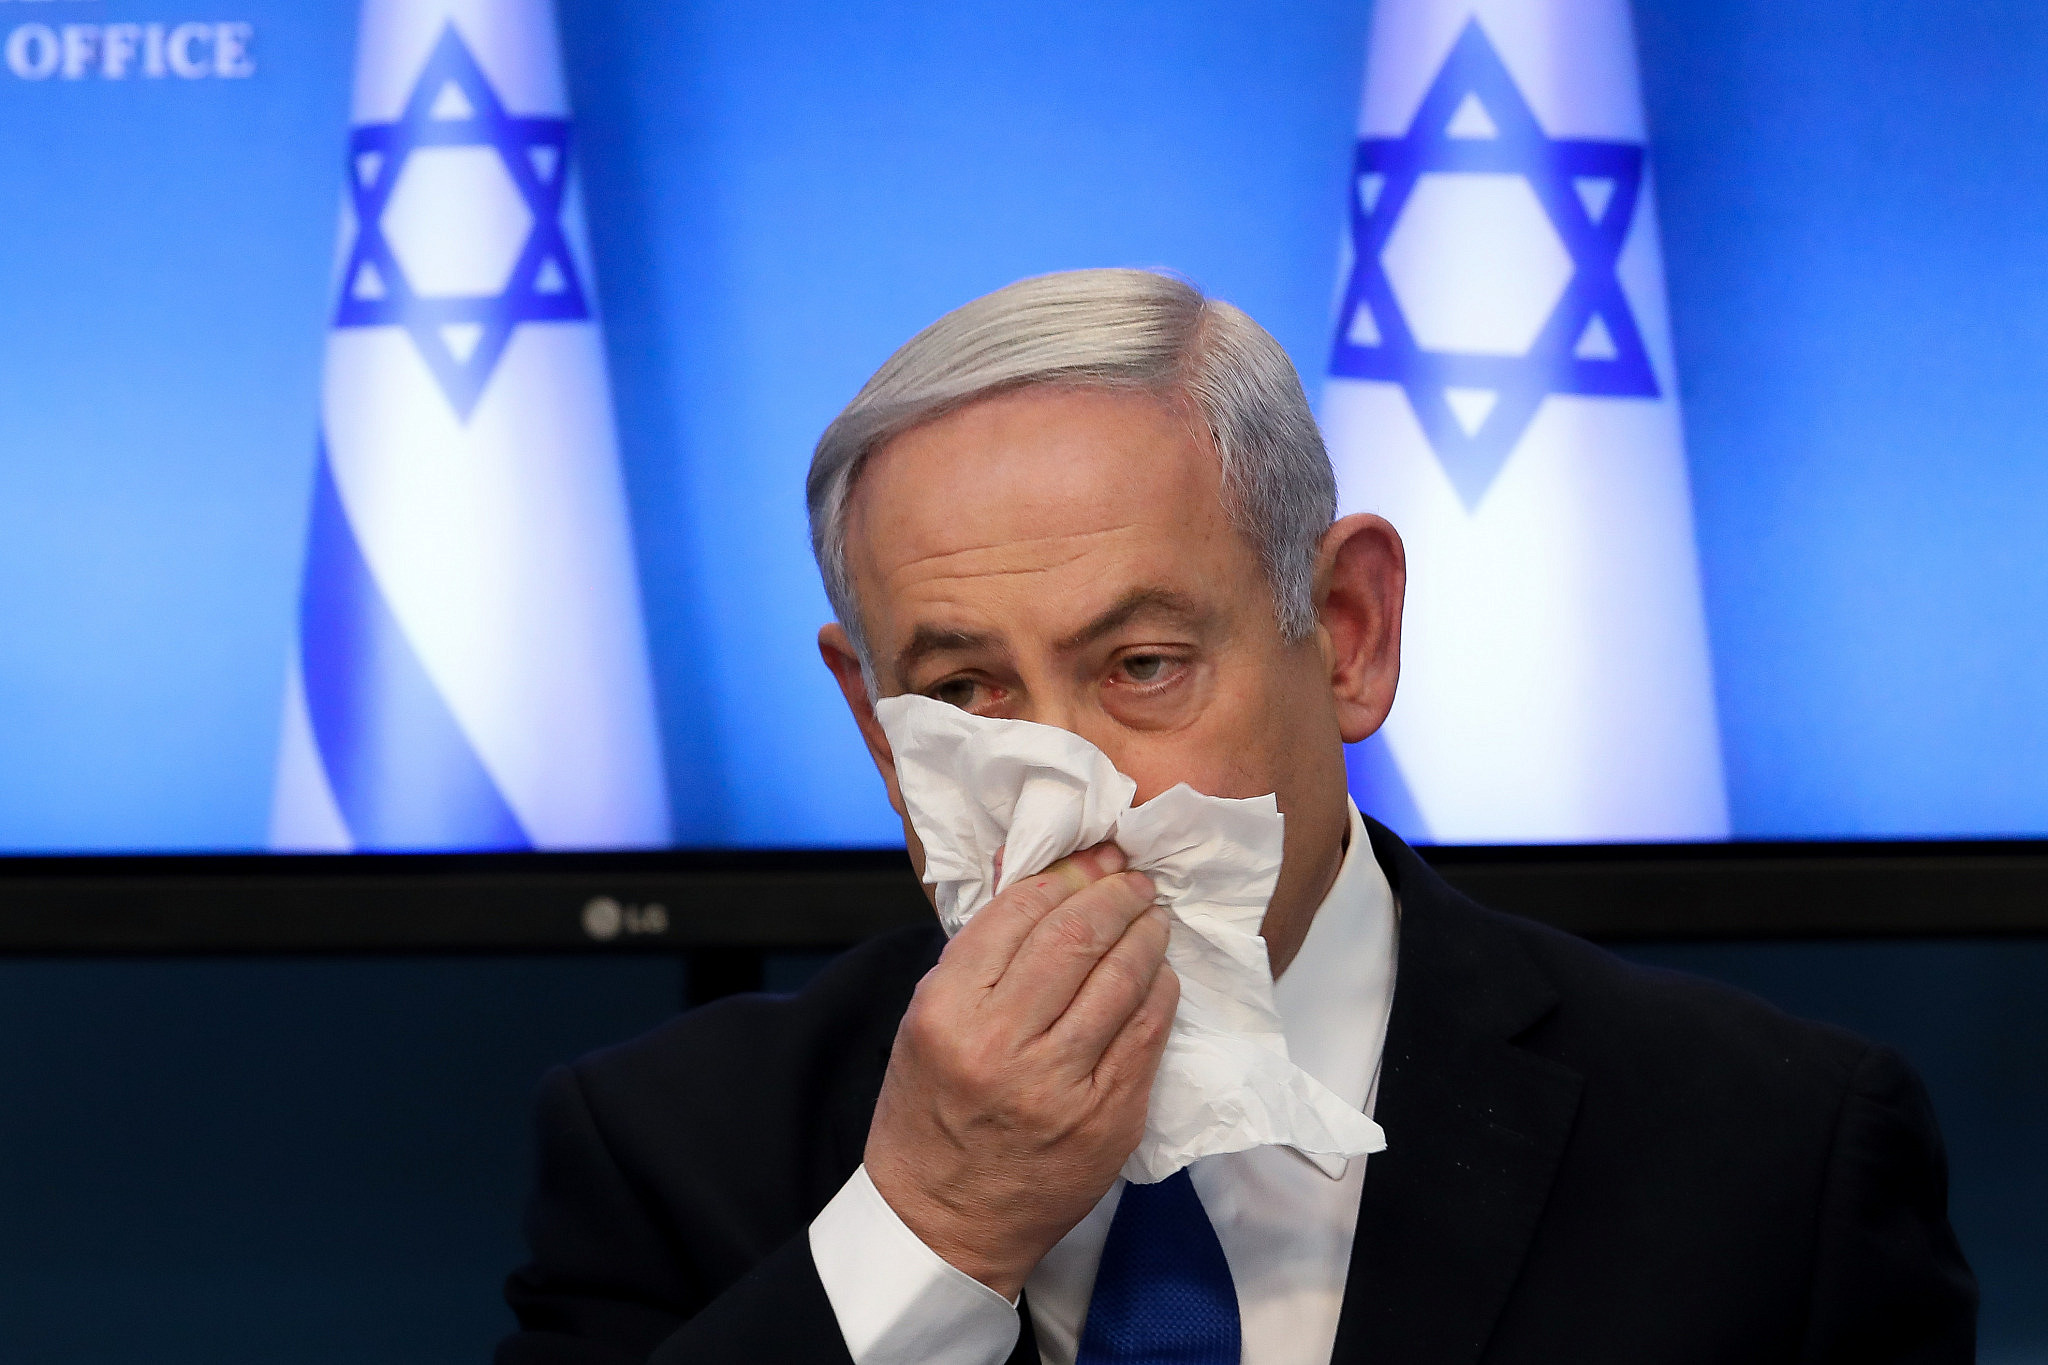 Israeli Prime Minister Benjamin Netanyahu at a press conference about COVID-19, at the Prime Minister's Office in Jerusalem on March 11, 2020. (Flash90)